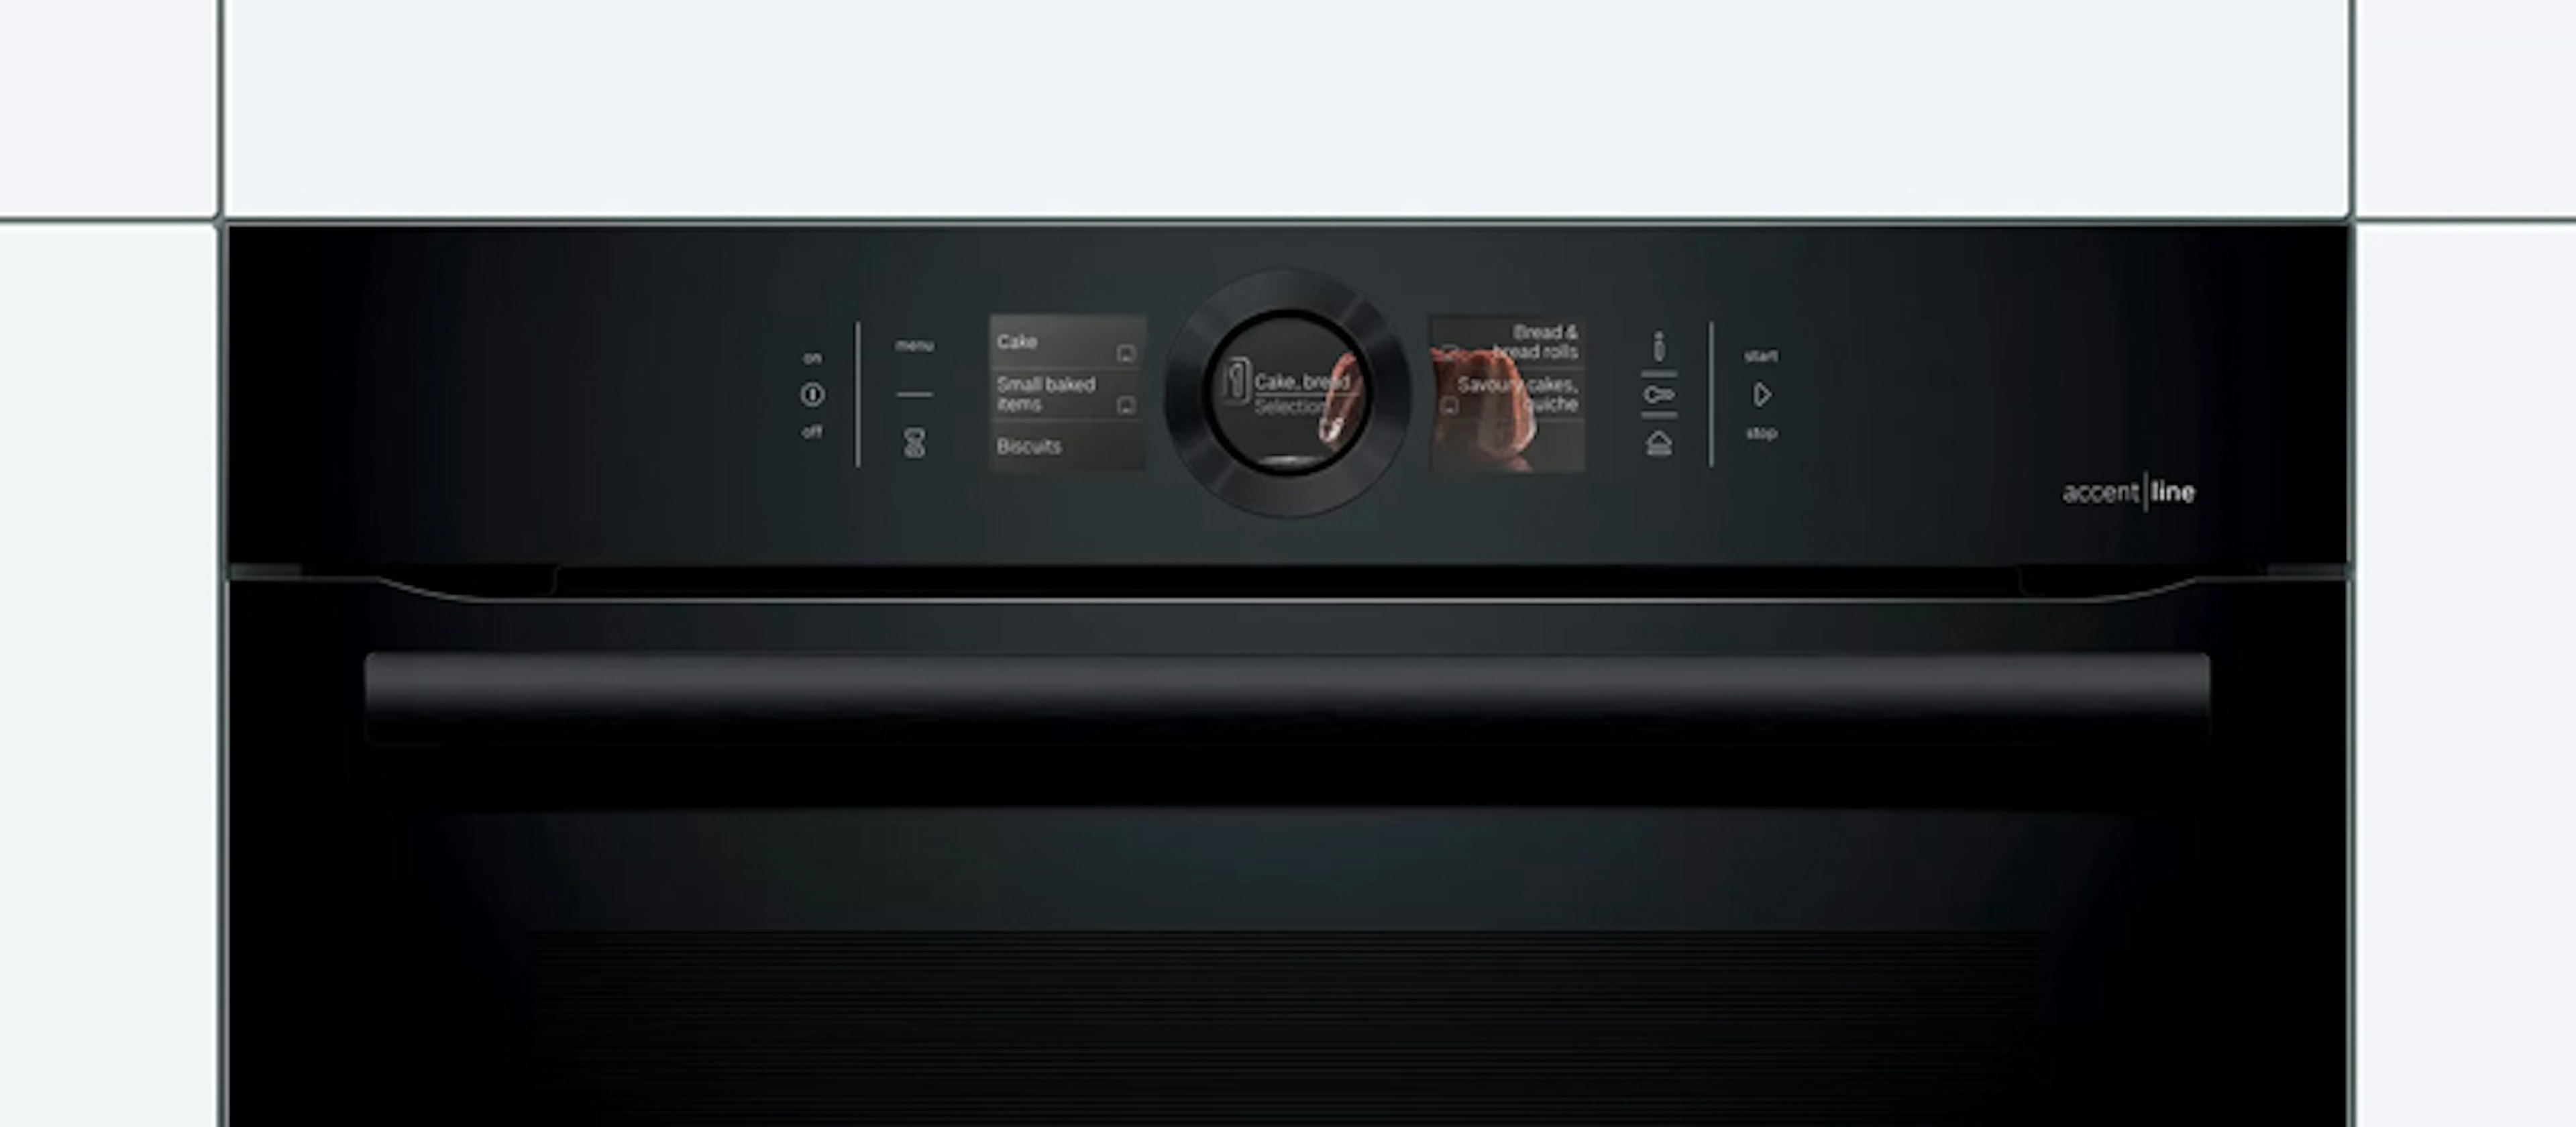 Accent Line ovens